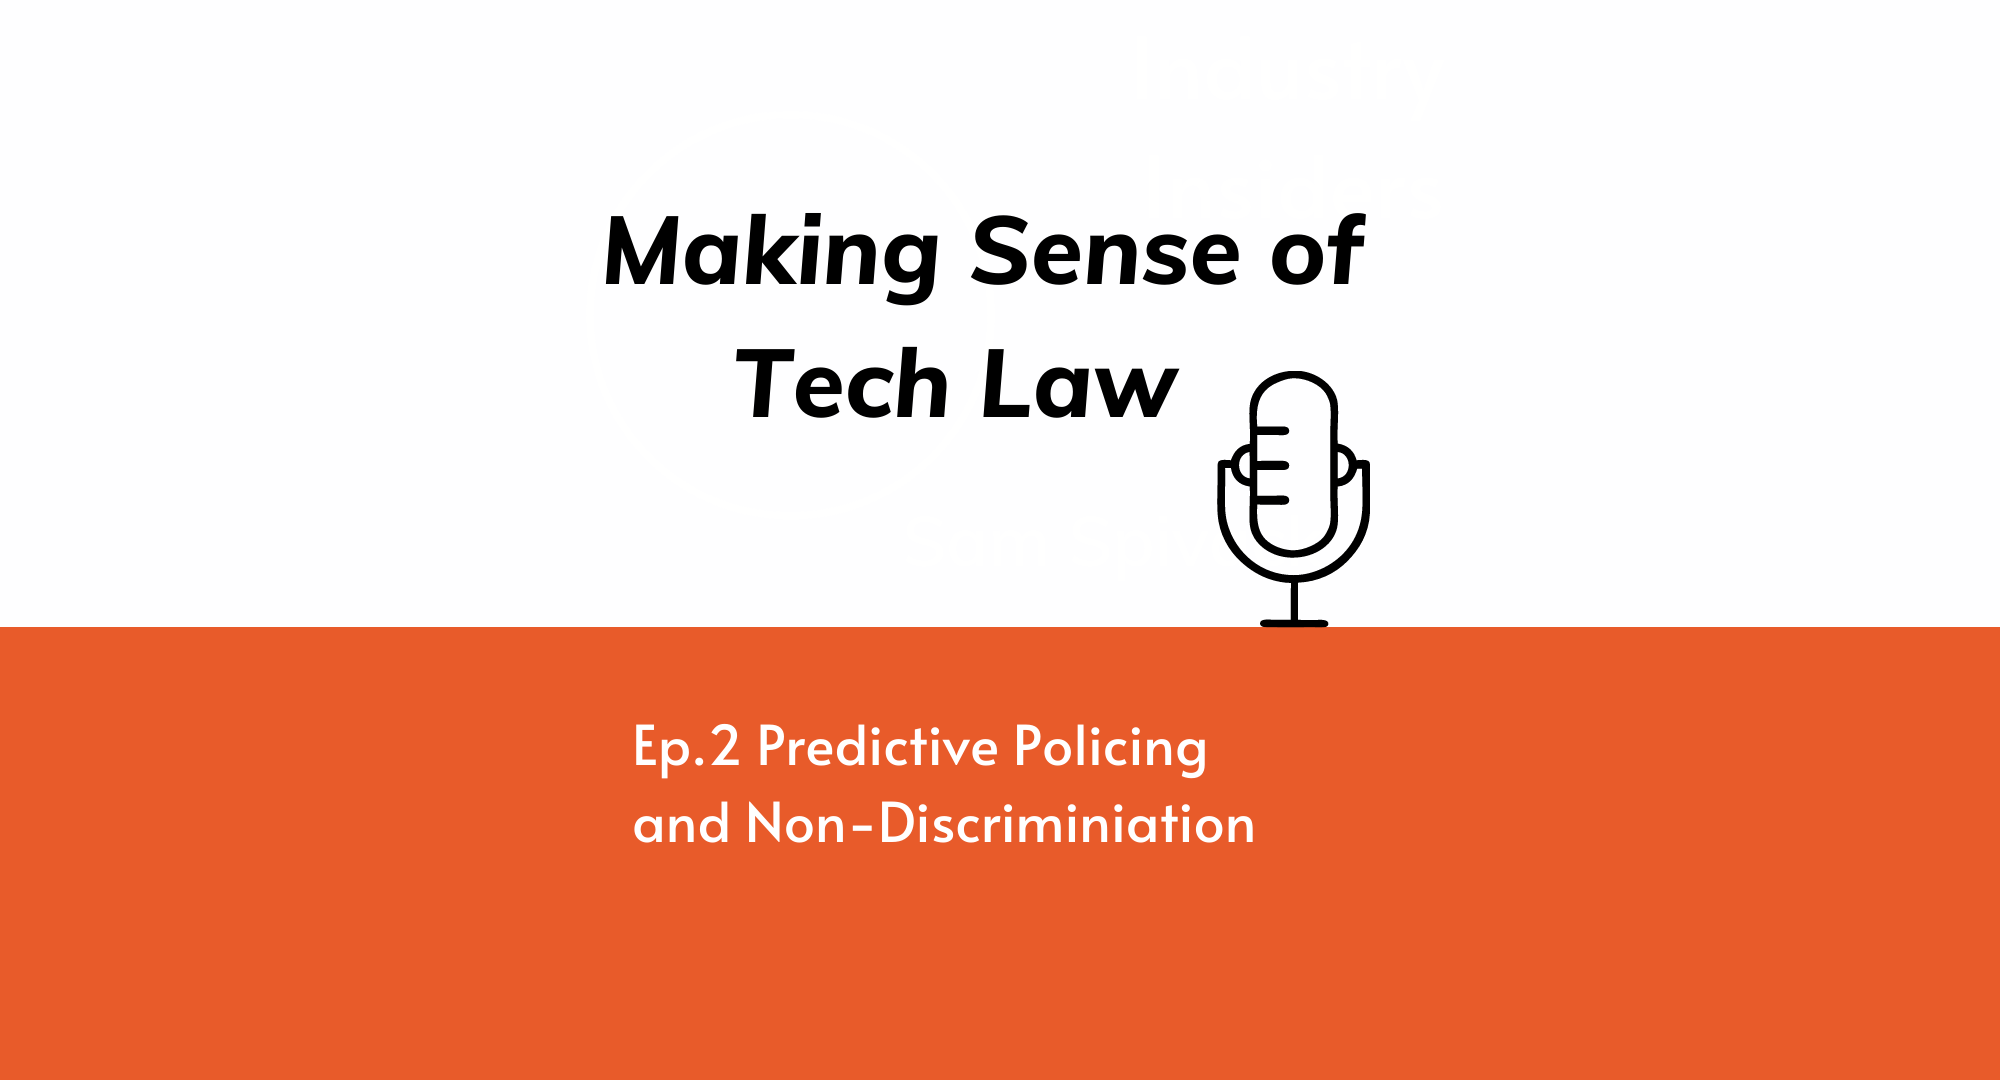 Making Sense of Tech Law Ep.2 Predictive Policing and NonDiscrimination